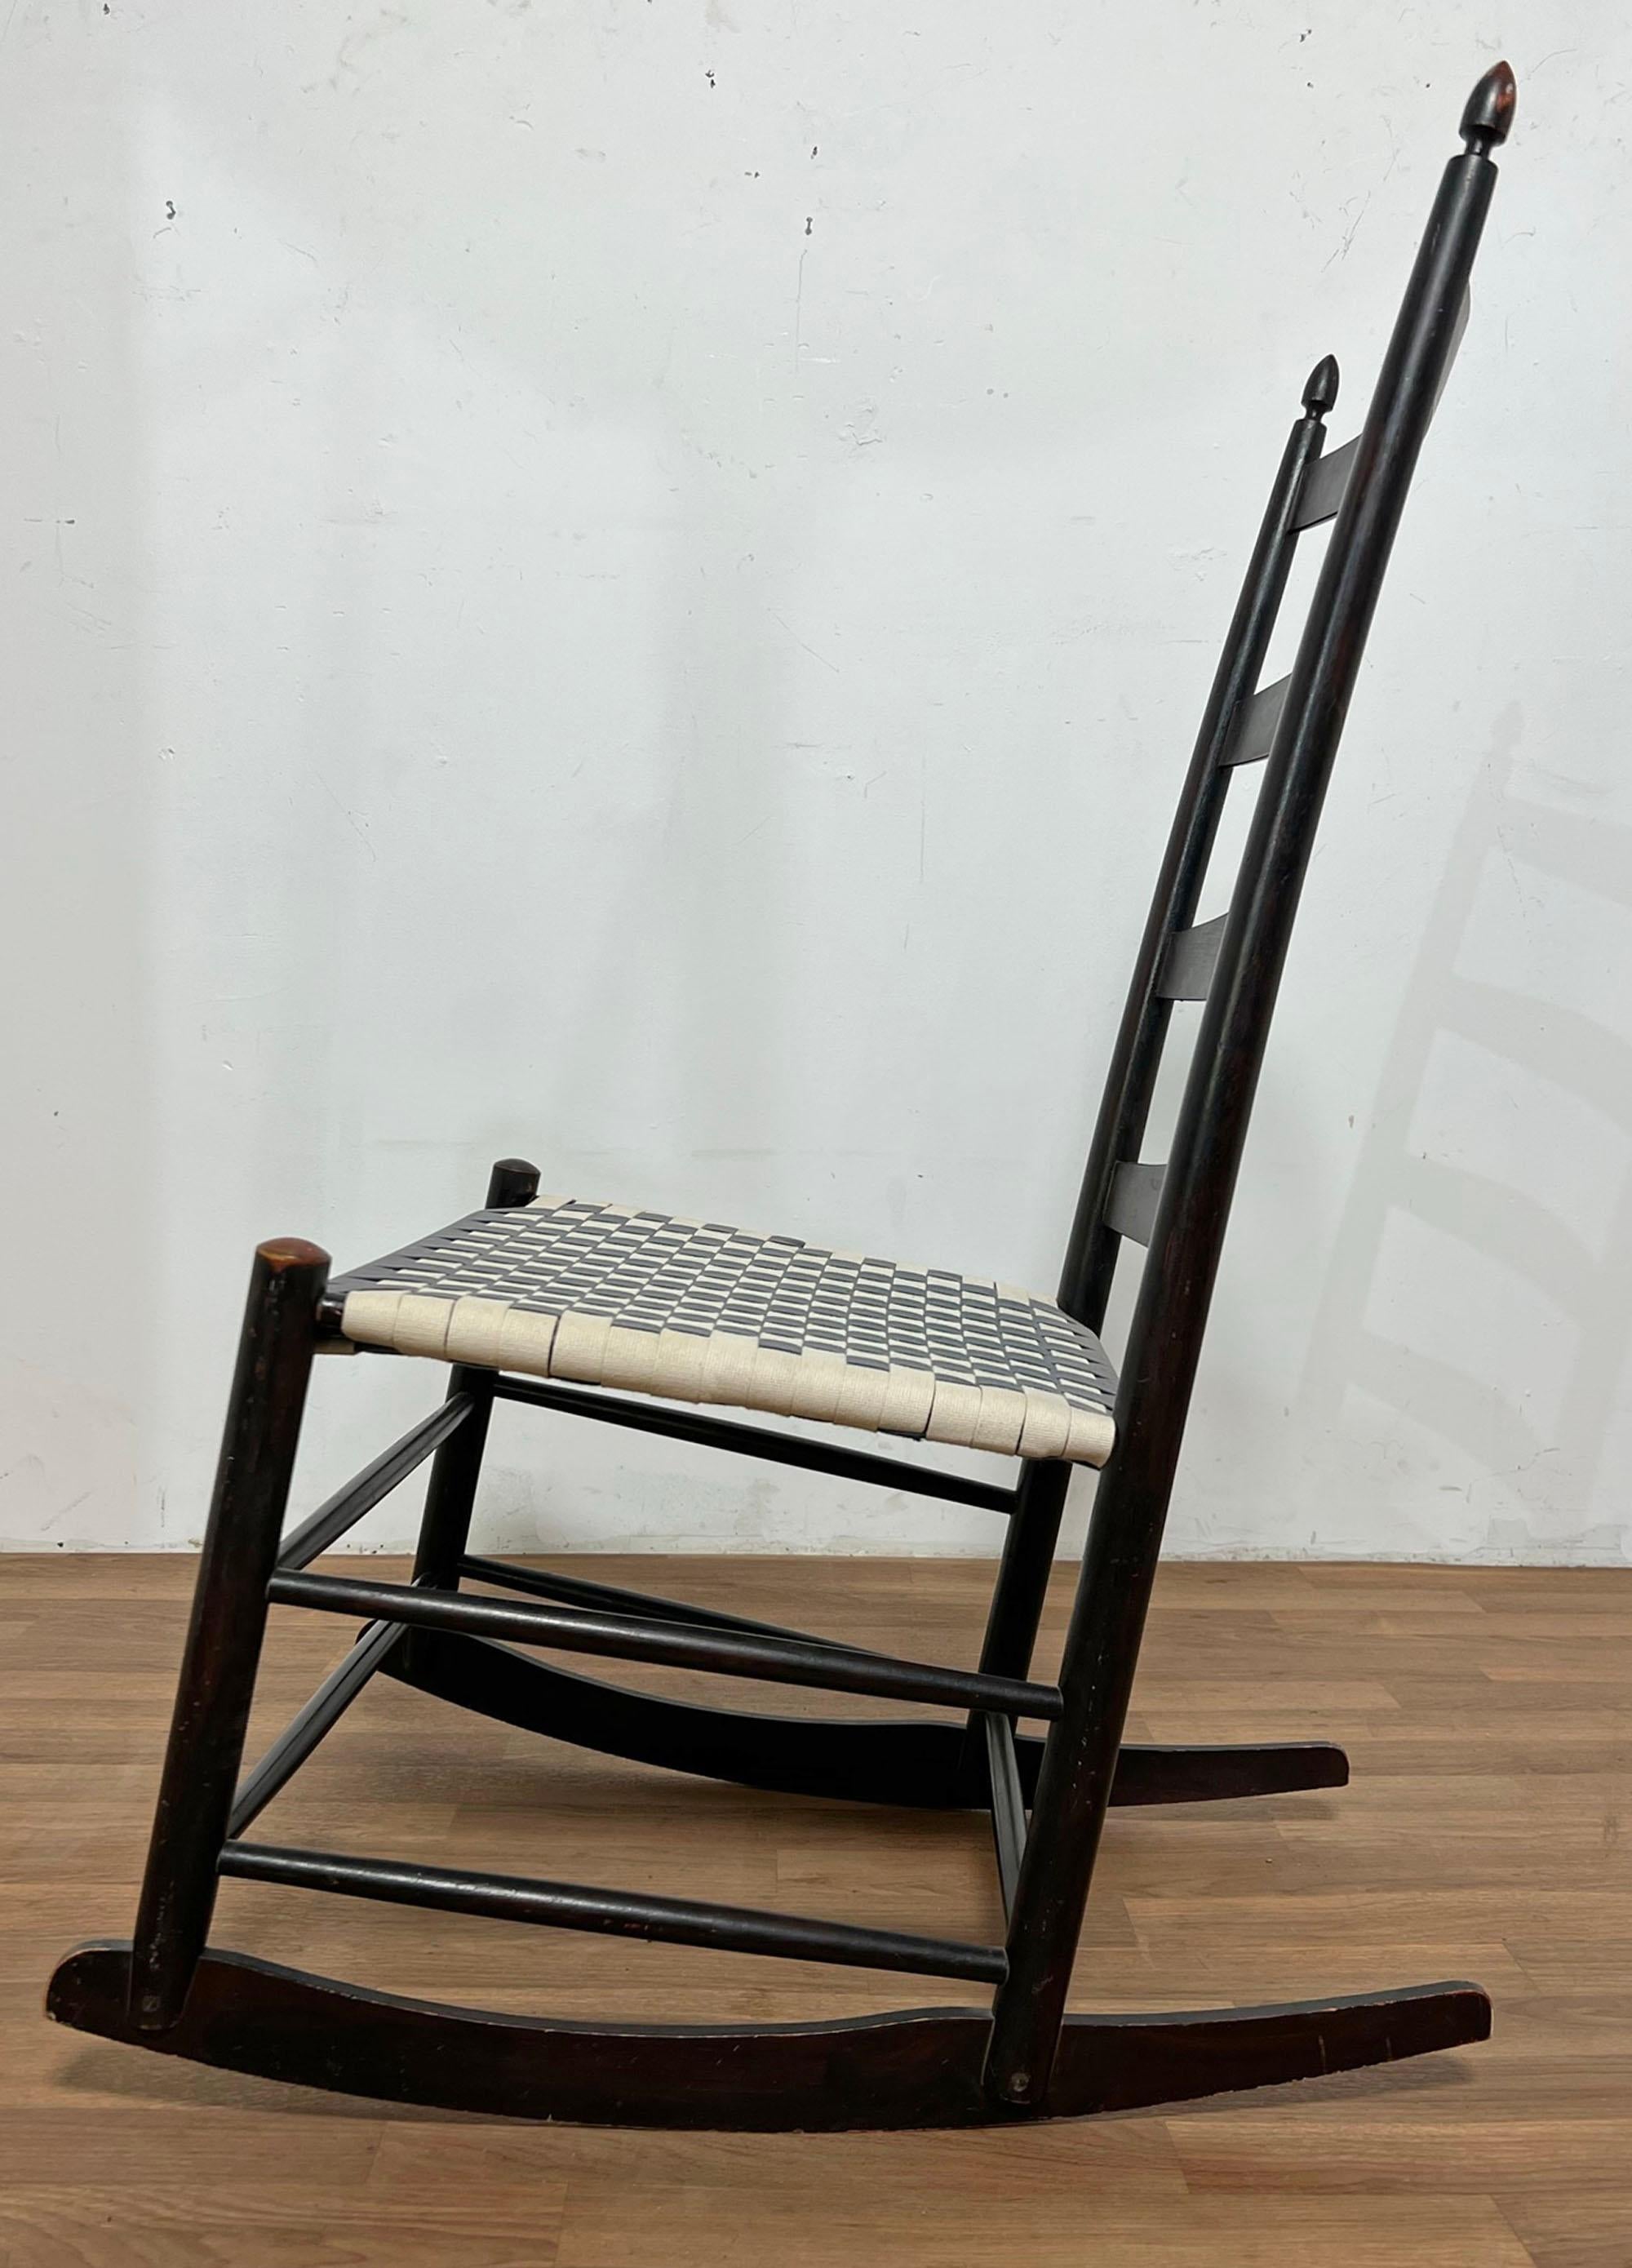 An authentic four slat No. 6 Rocking chair from the important Mt. Lebanon Community of Shakers, circa mid 19th century.